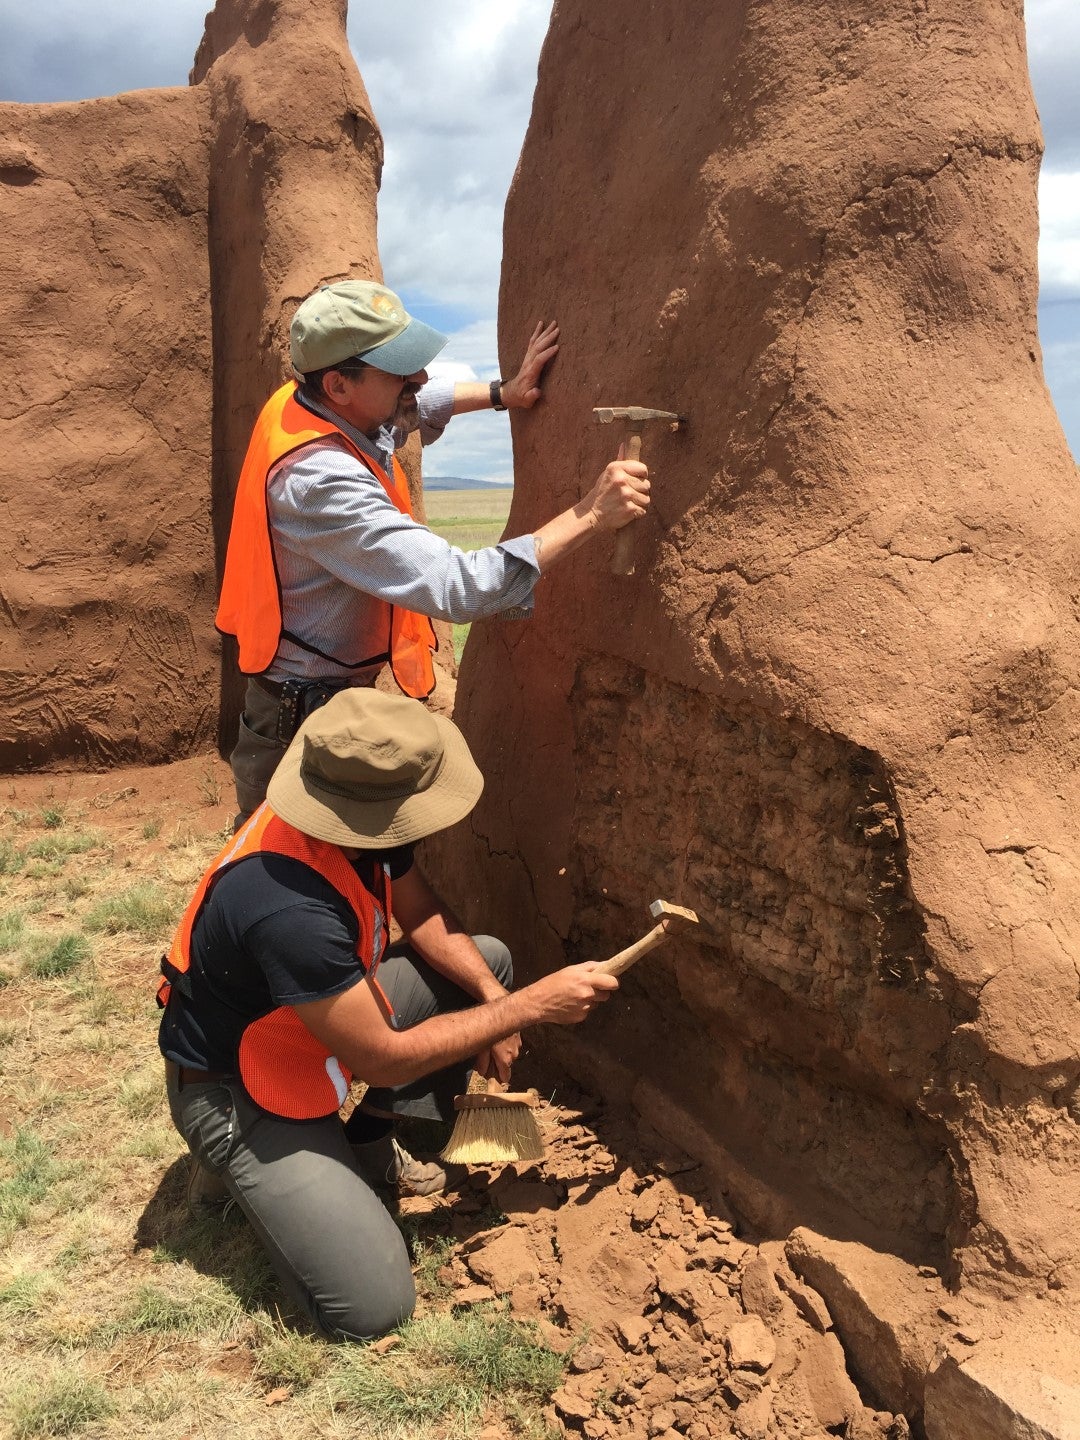 Frank Matero leading field work with a team from PennDesign's Architectural Conservation Lab in New Mexico